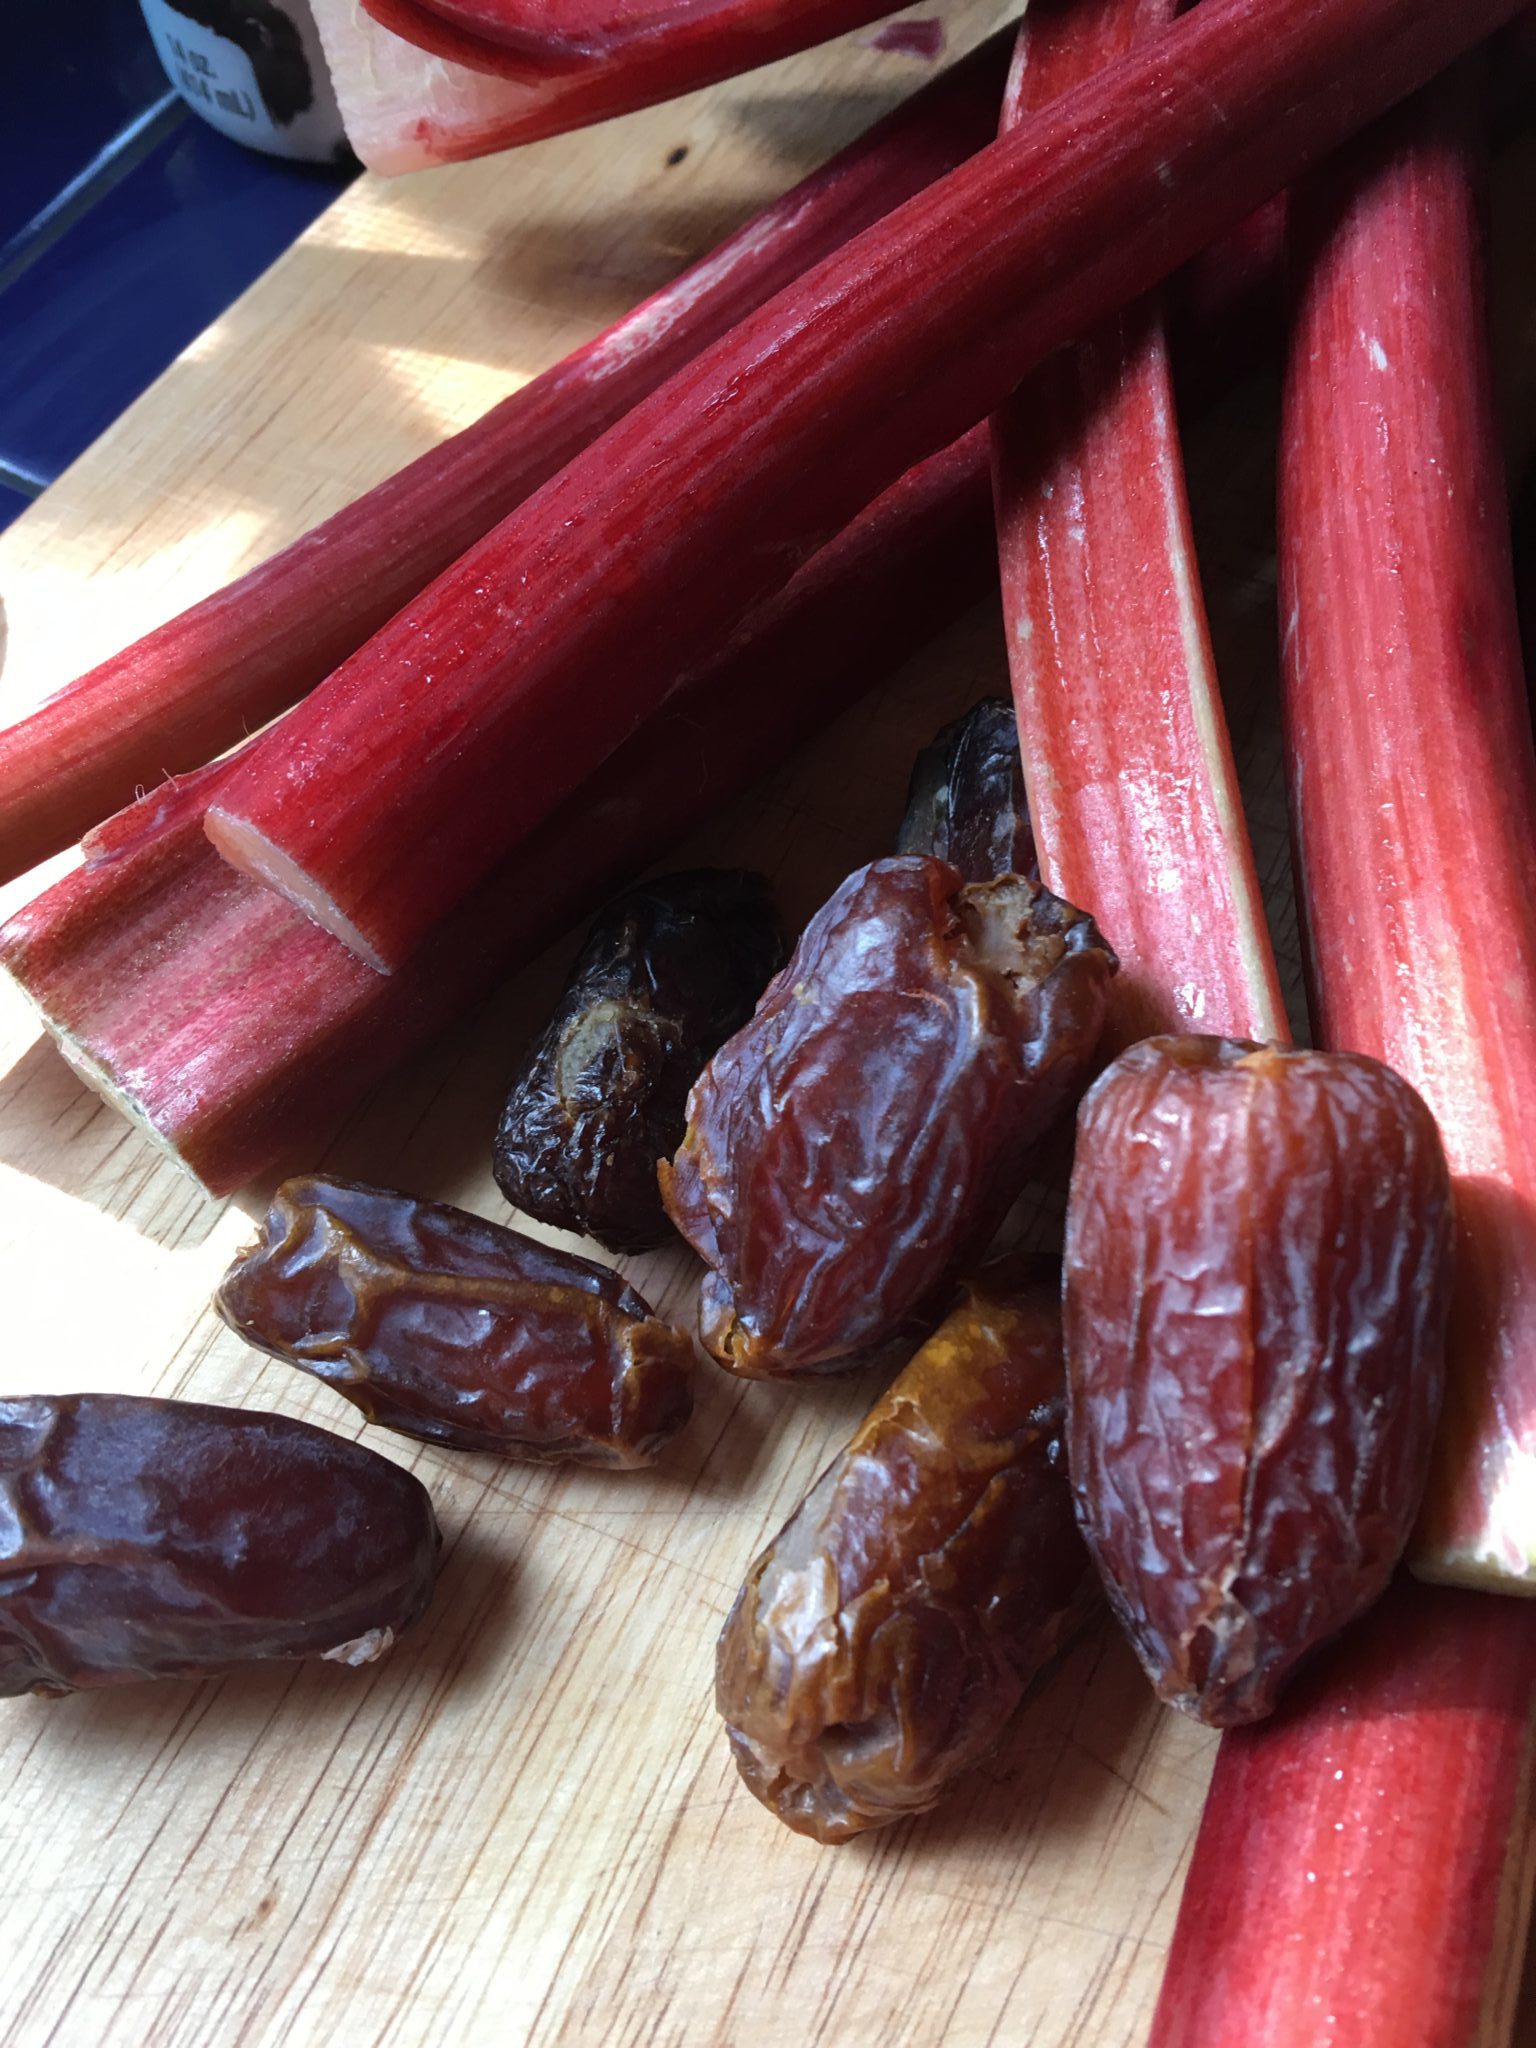 Dates and Rhubarb